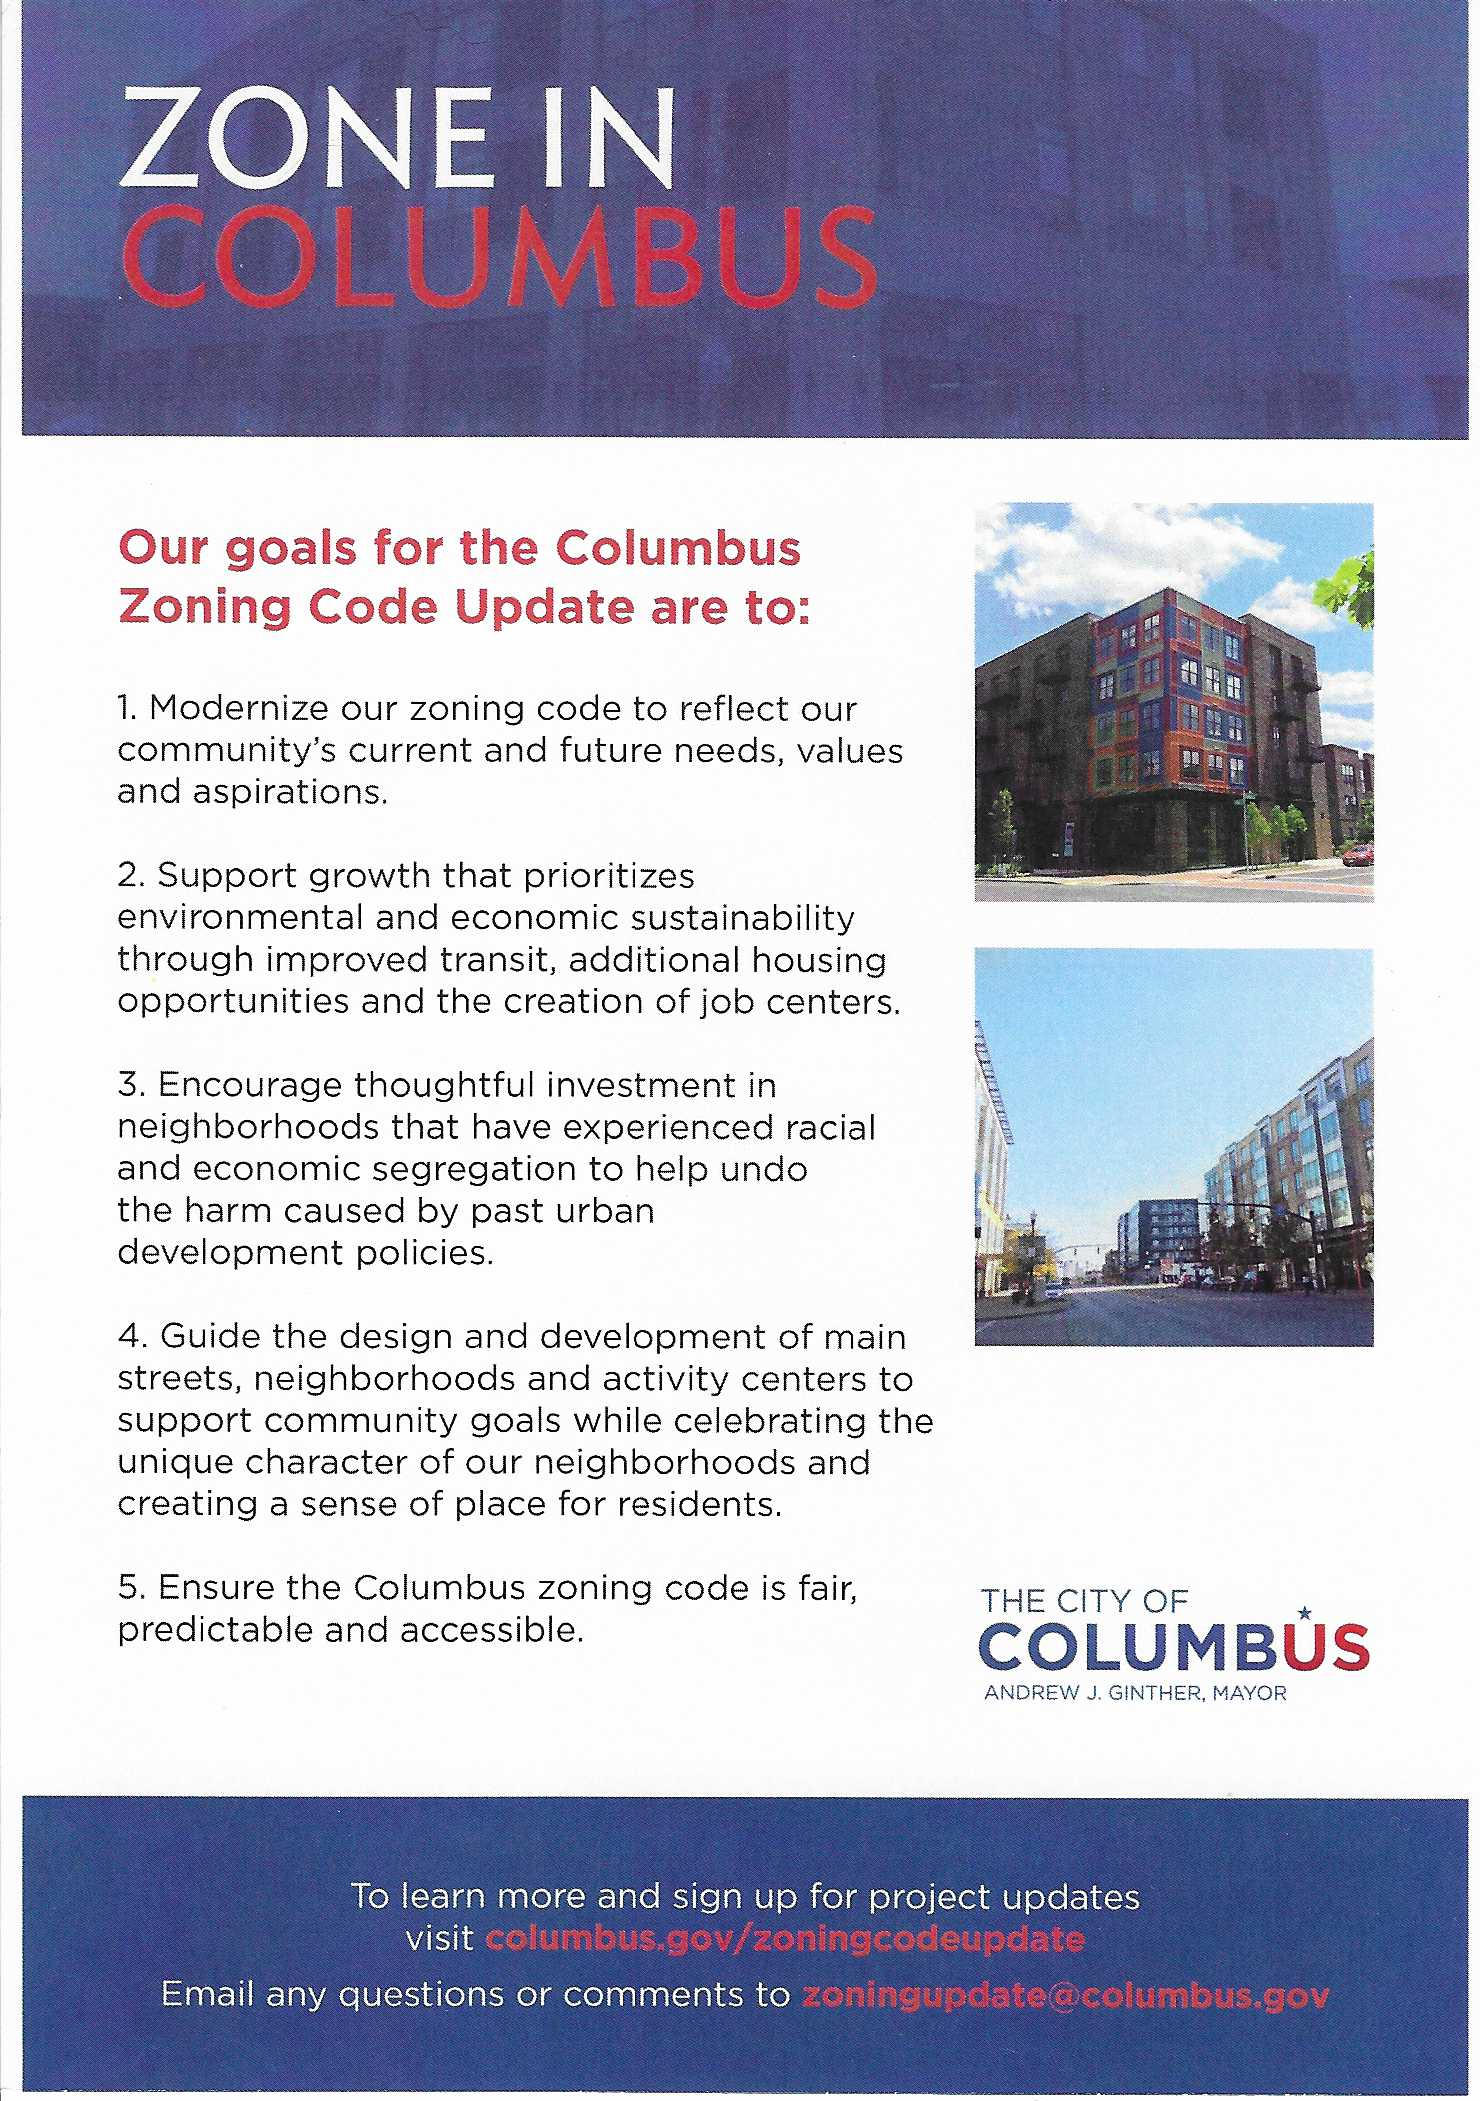 This handout is primarily the five bullet points in the blockquote above, with a note that updates will be available through the project webpage, linked above. Email your questions or comments to zoningupdate@columbus.gov